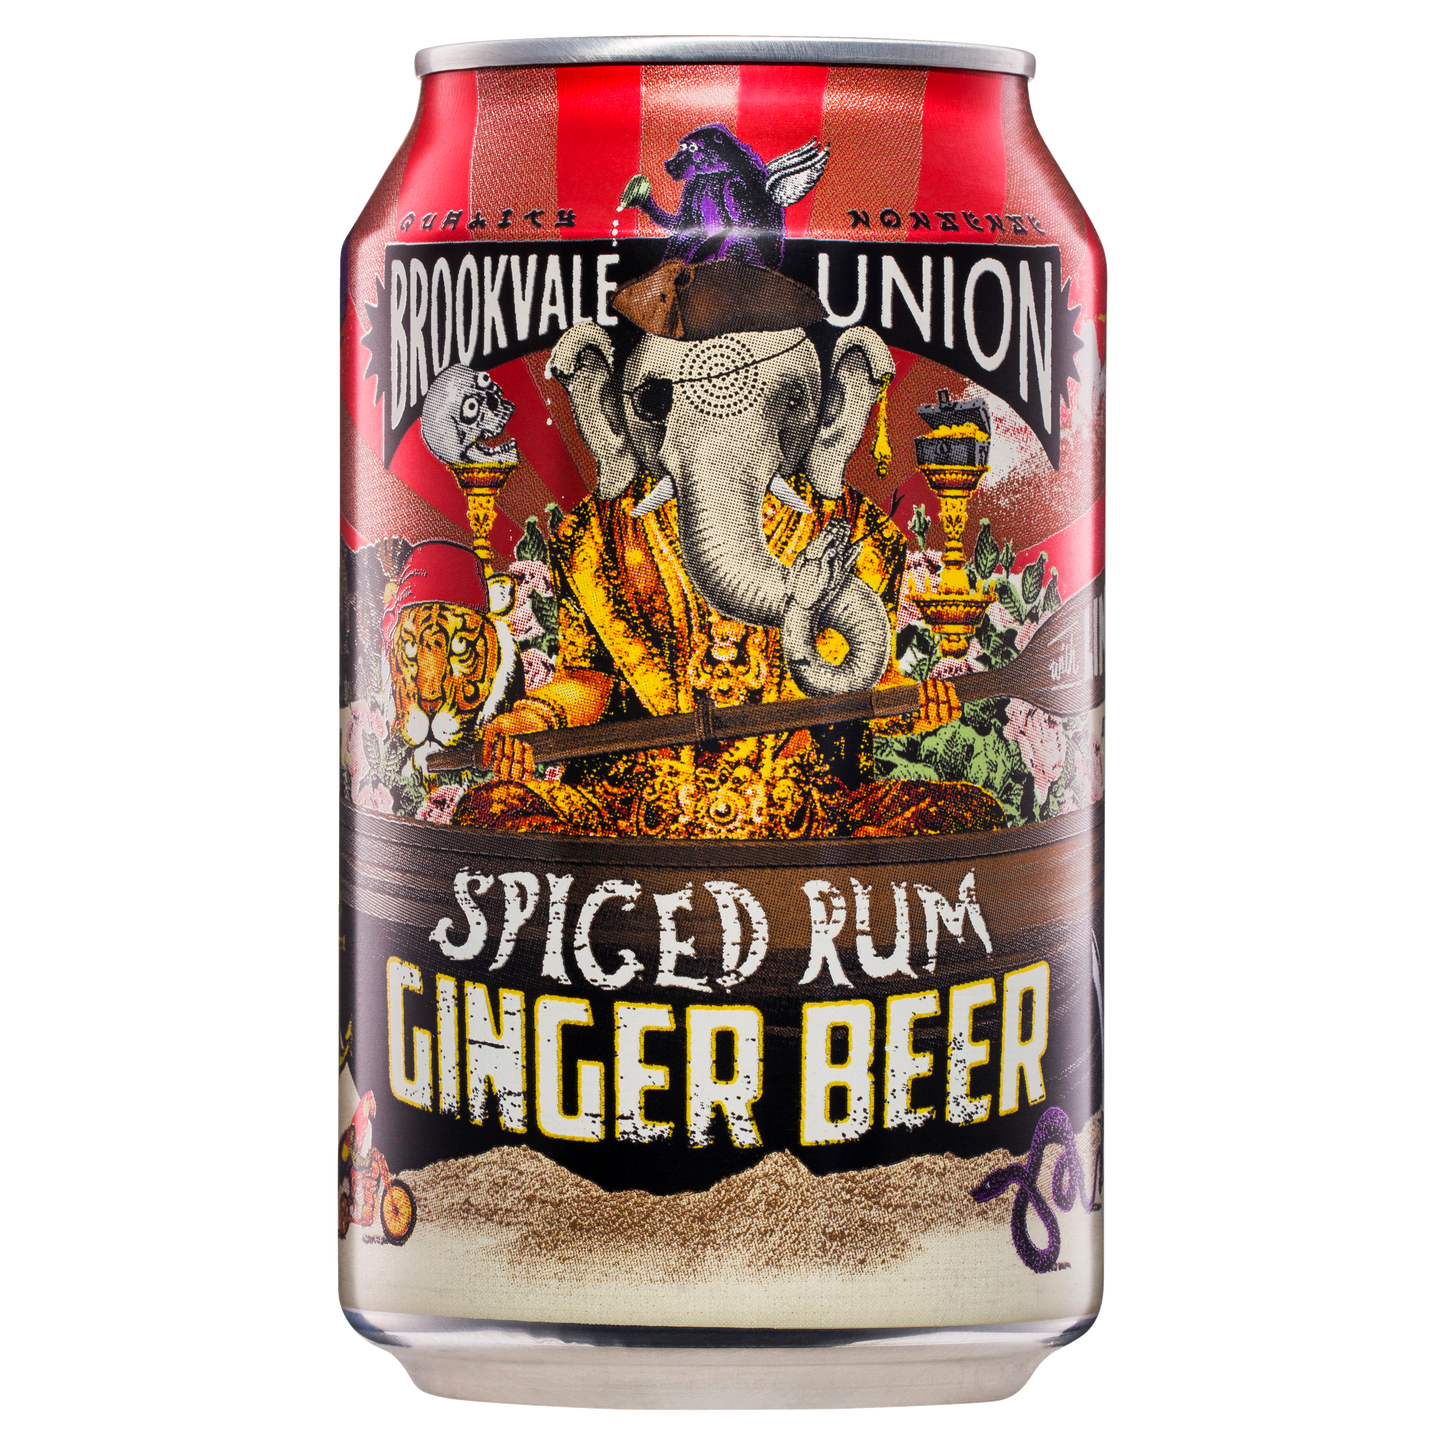 Brookvale Union Spiced Rum Ginger Beer Cans 330ml